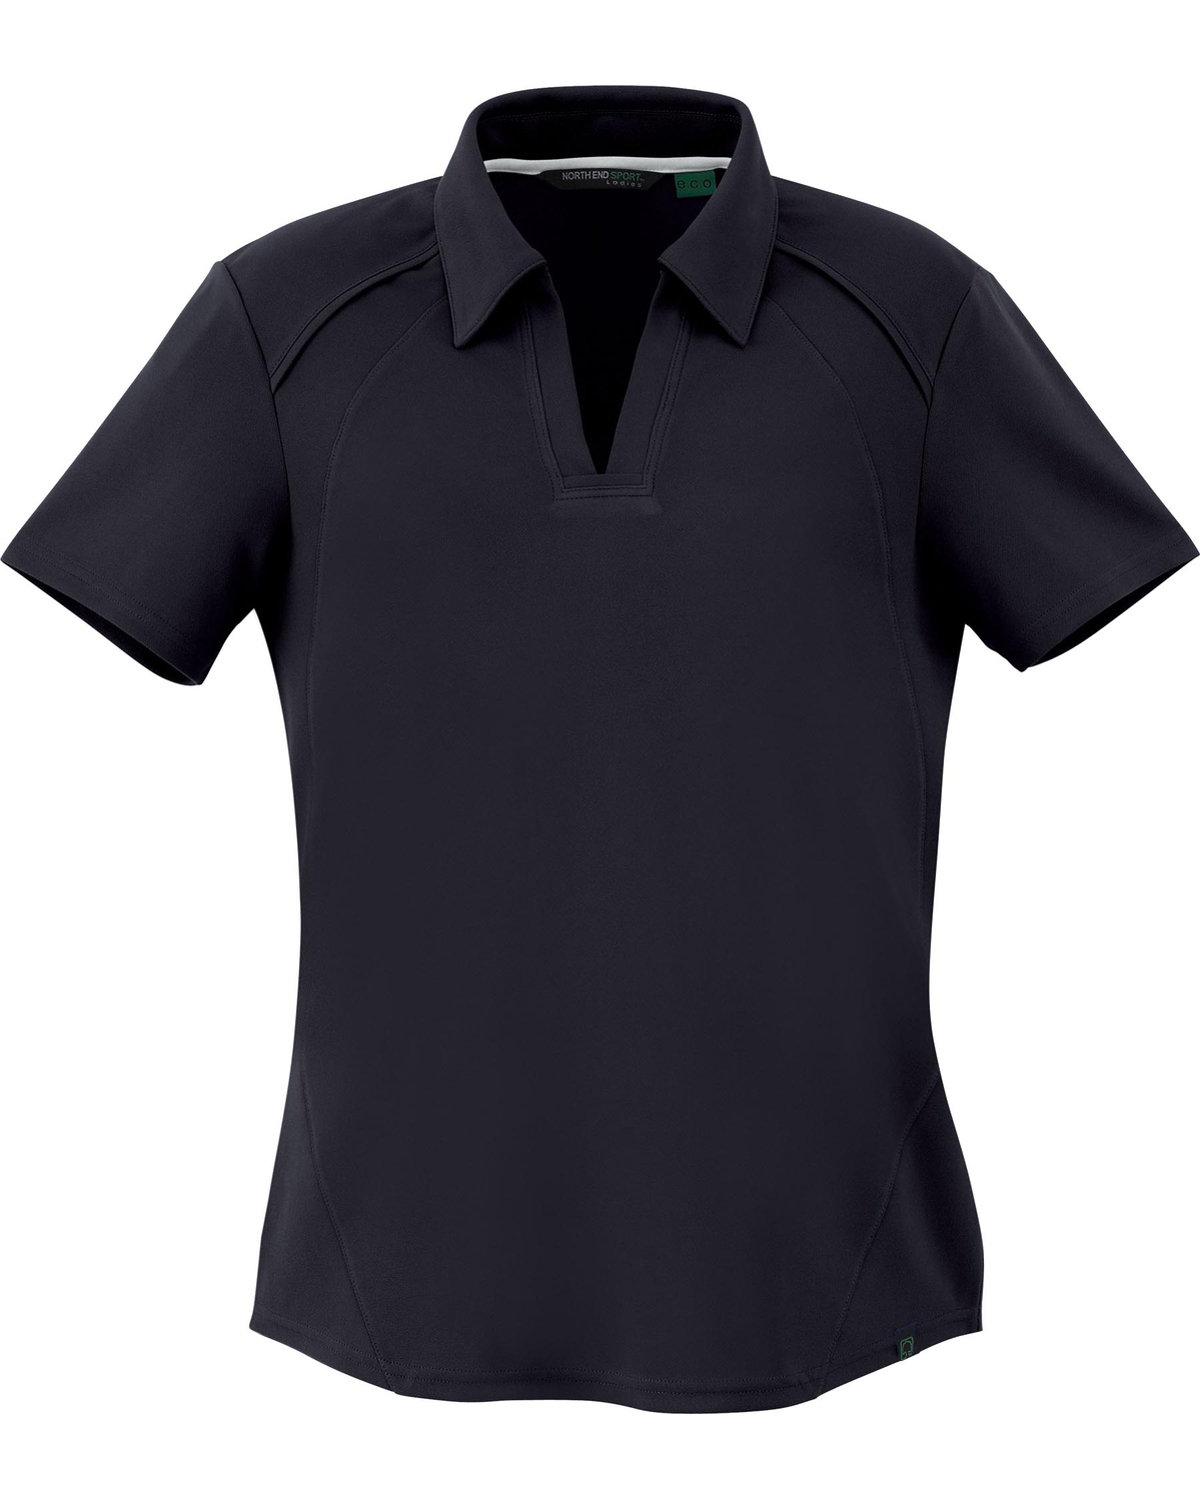 Picture of North End Women's Recycled Polyester Performance Piqué Polo 